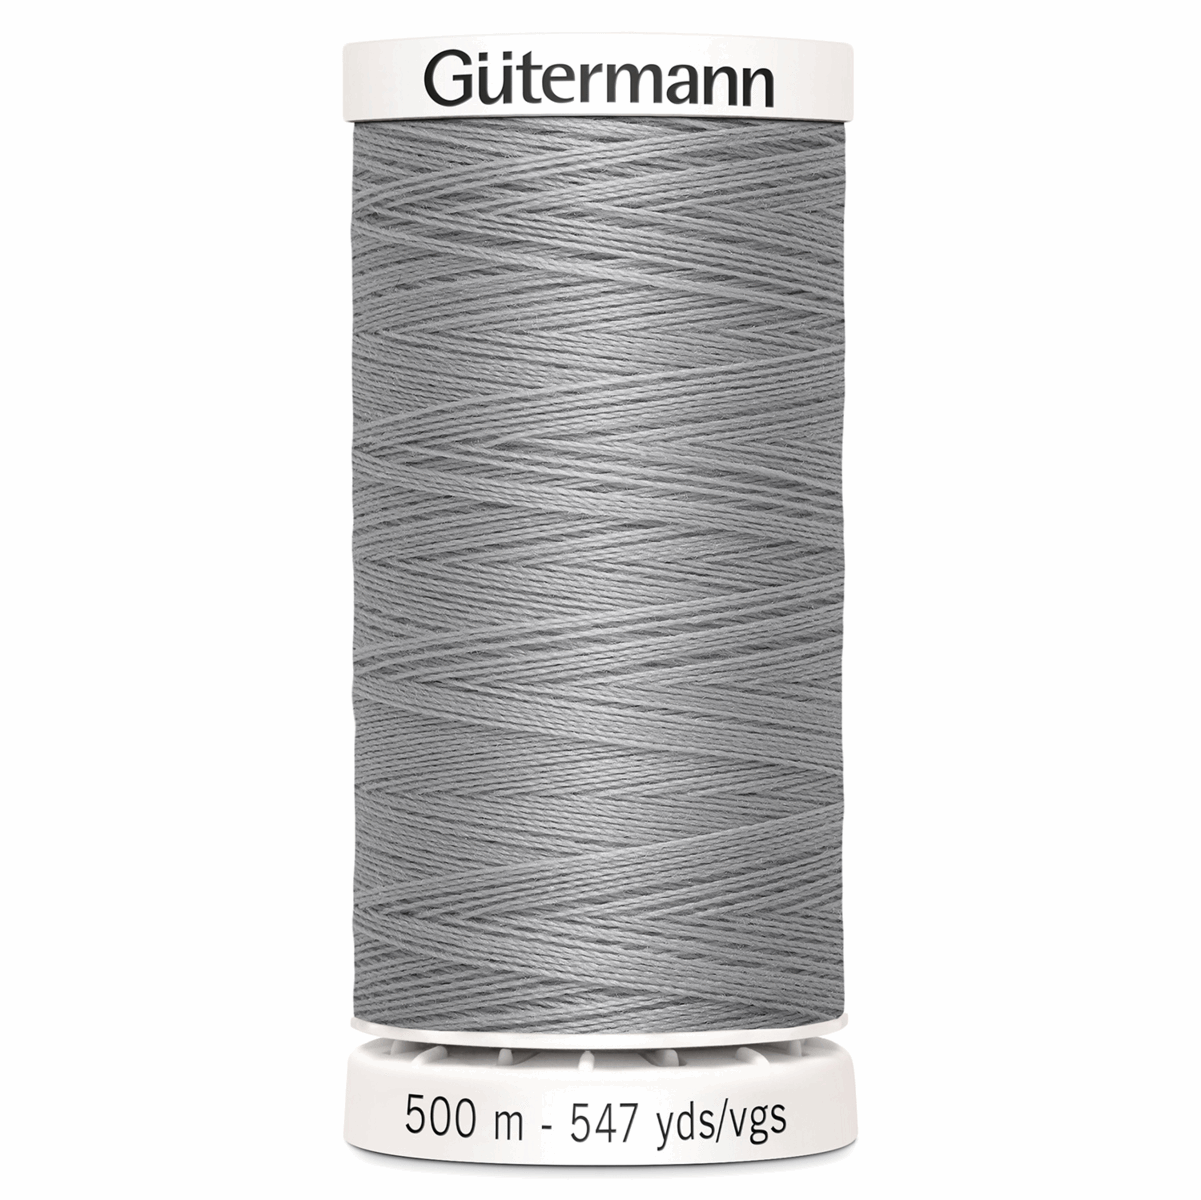 500m size Gutermann Sew-All Sewing Thread 38 Grey from Jaycotts Sewing Supplies